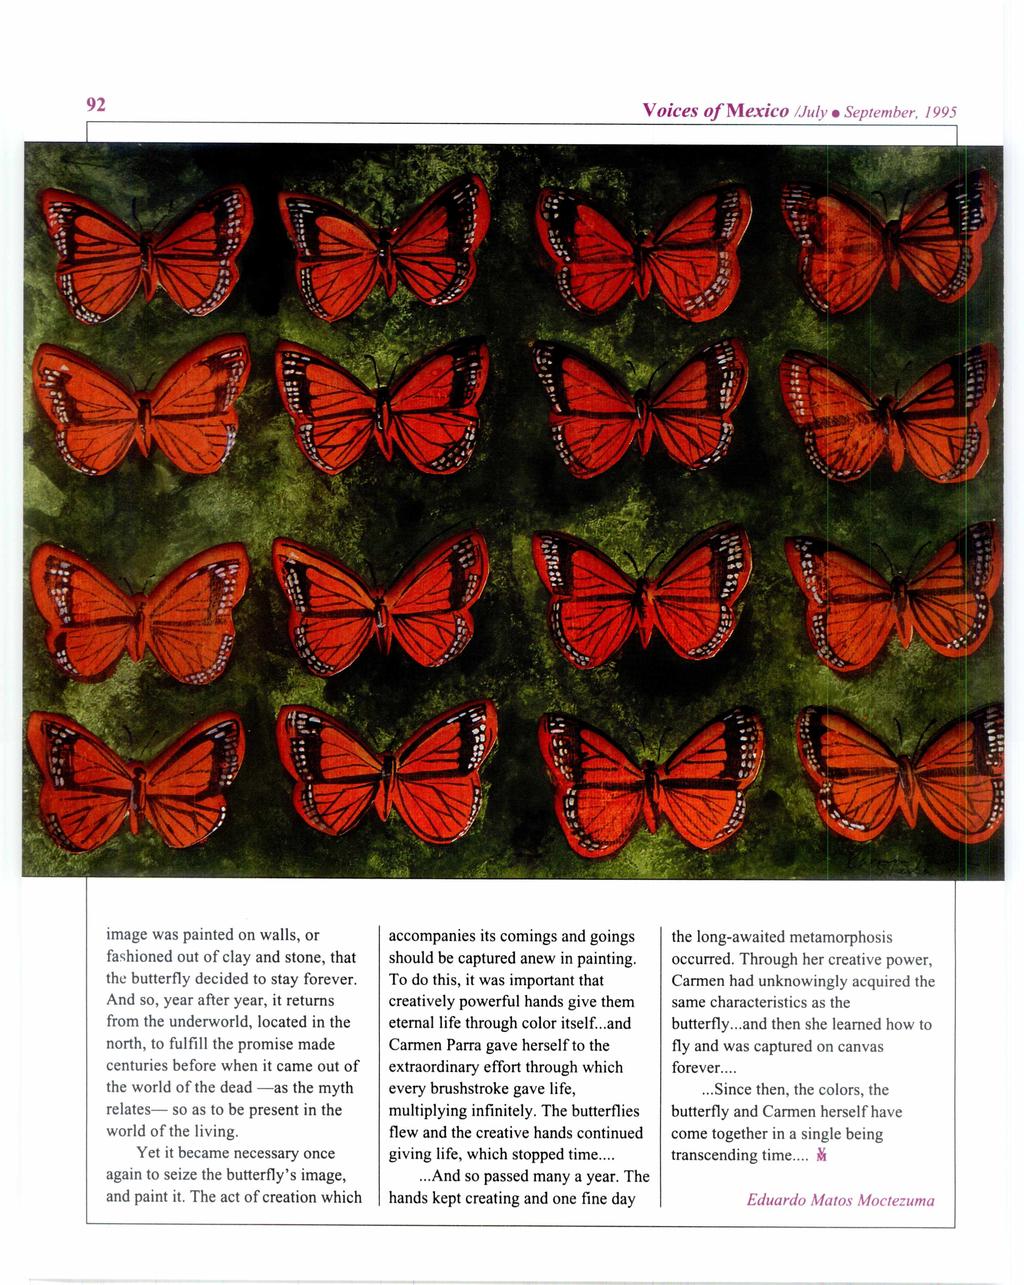 92 Voices of Mexico /July September, 1995 image was painted on walls, or fashioned out of clay and stone, that the butterfly decided to stay forever.